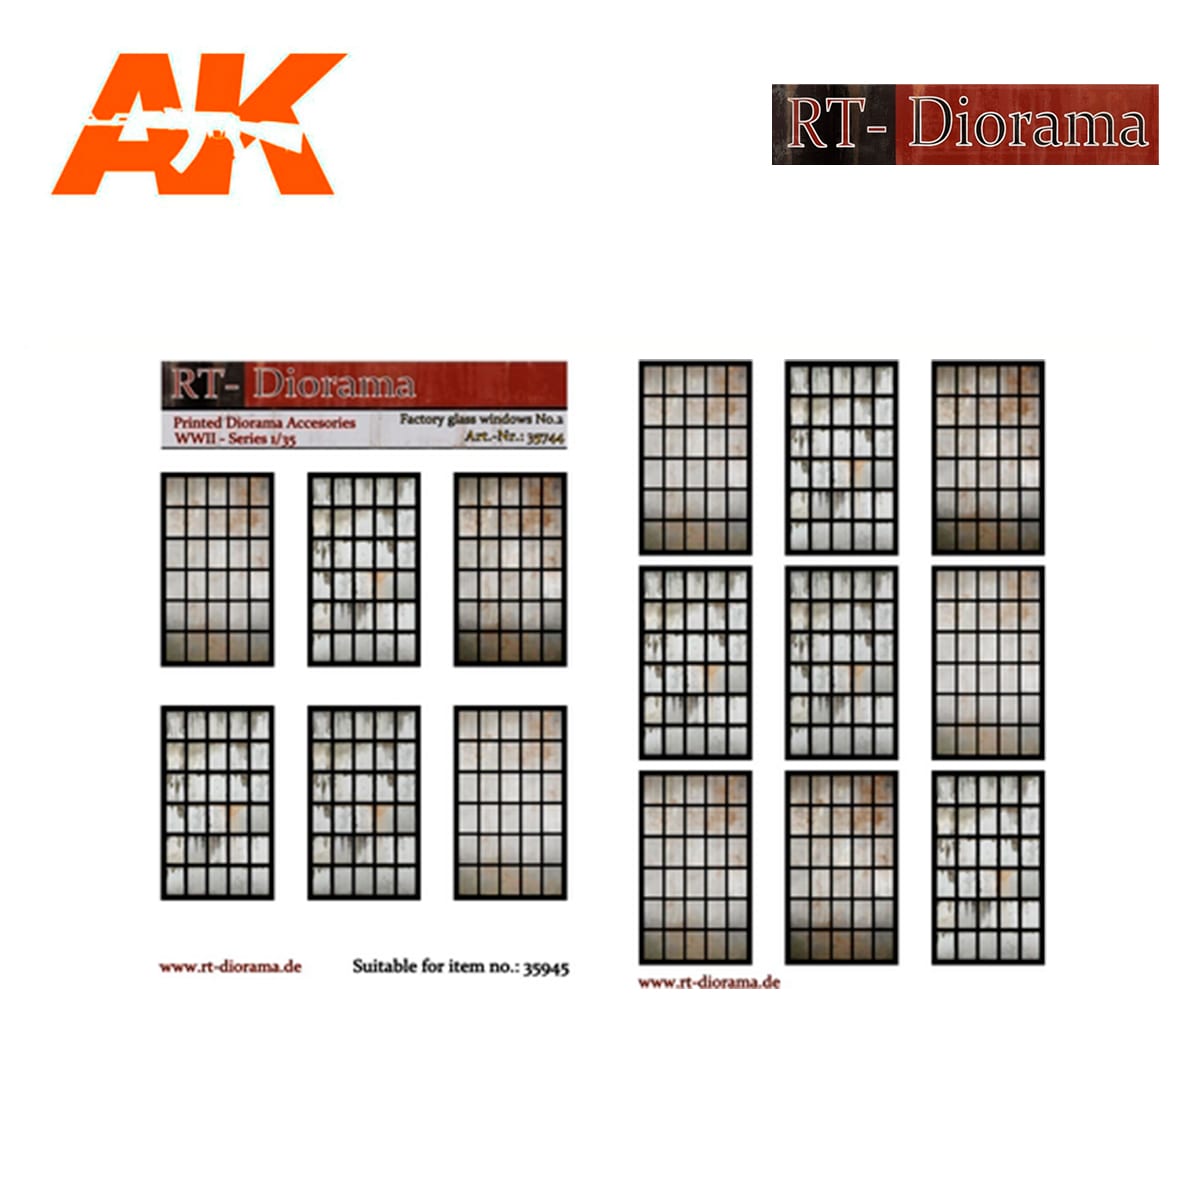 Printed Accesories: Factory glass windows Nr.2